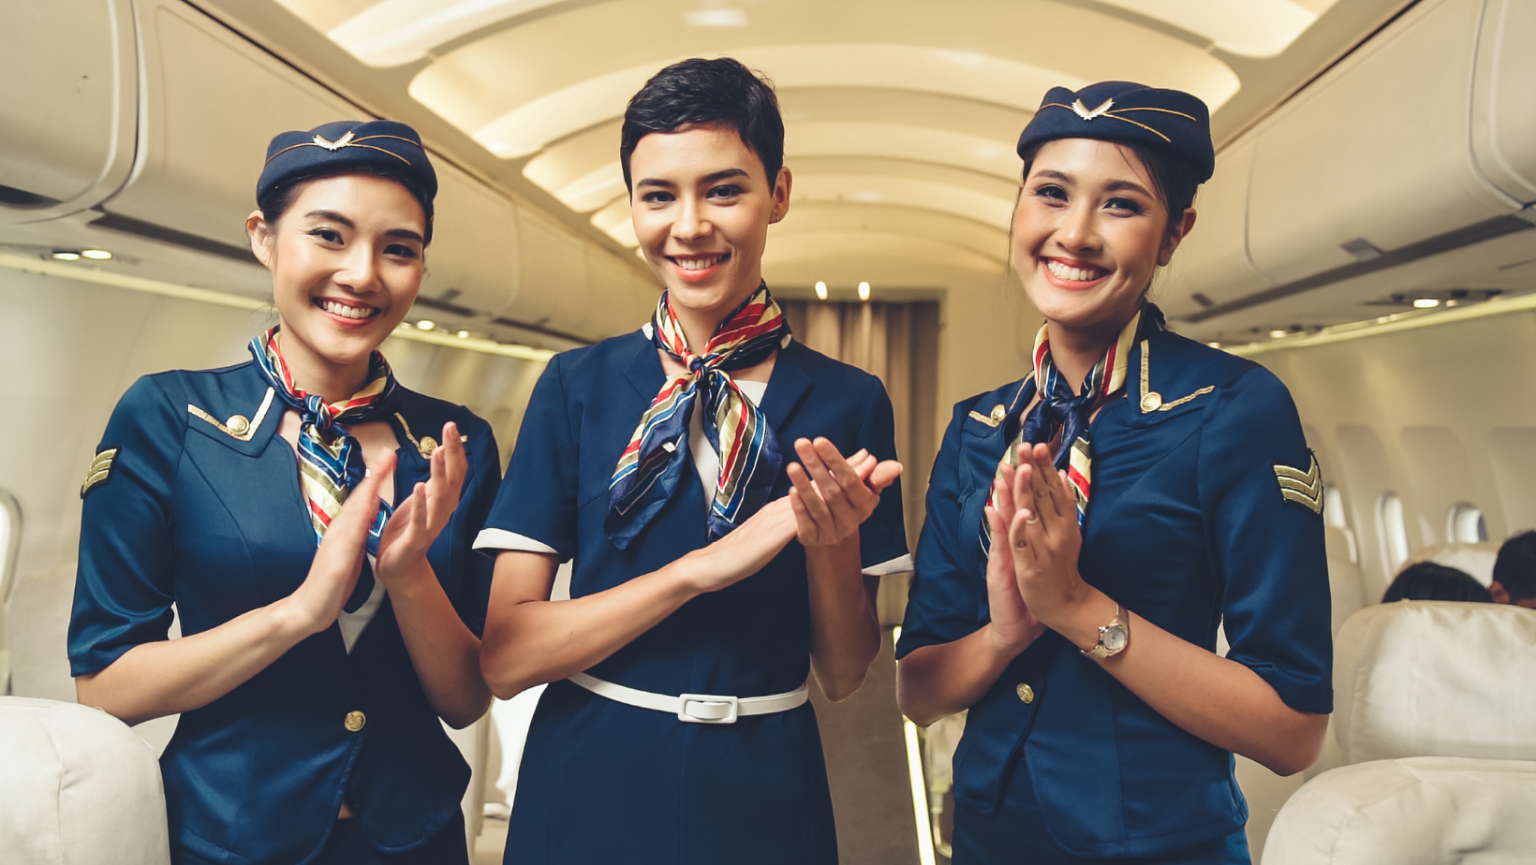 Latest Cabin Crew and Airline Blog | Cabin Crew Wings